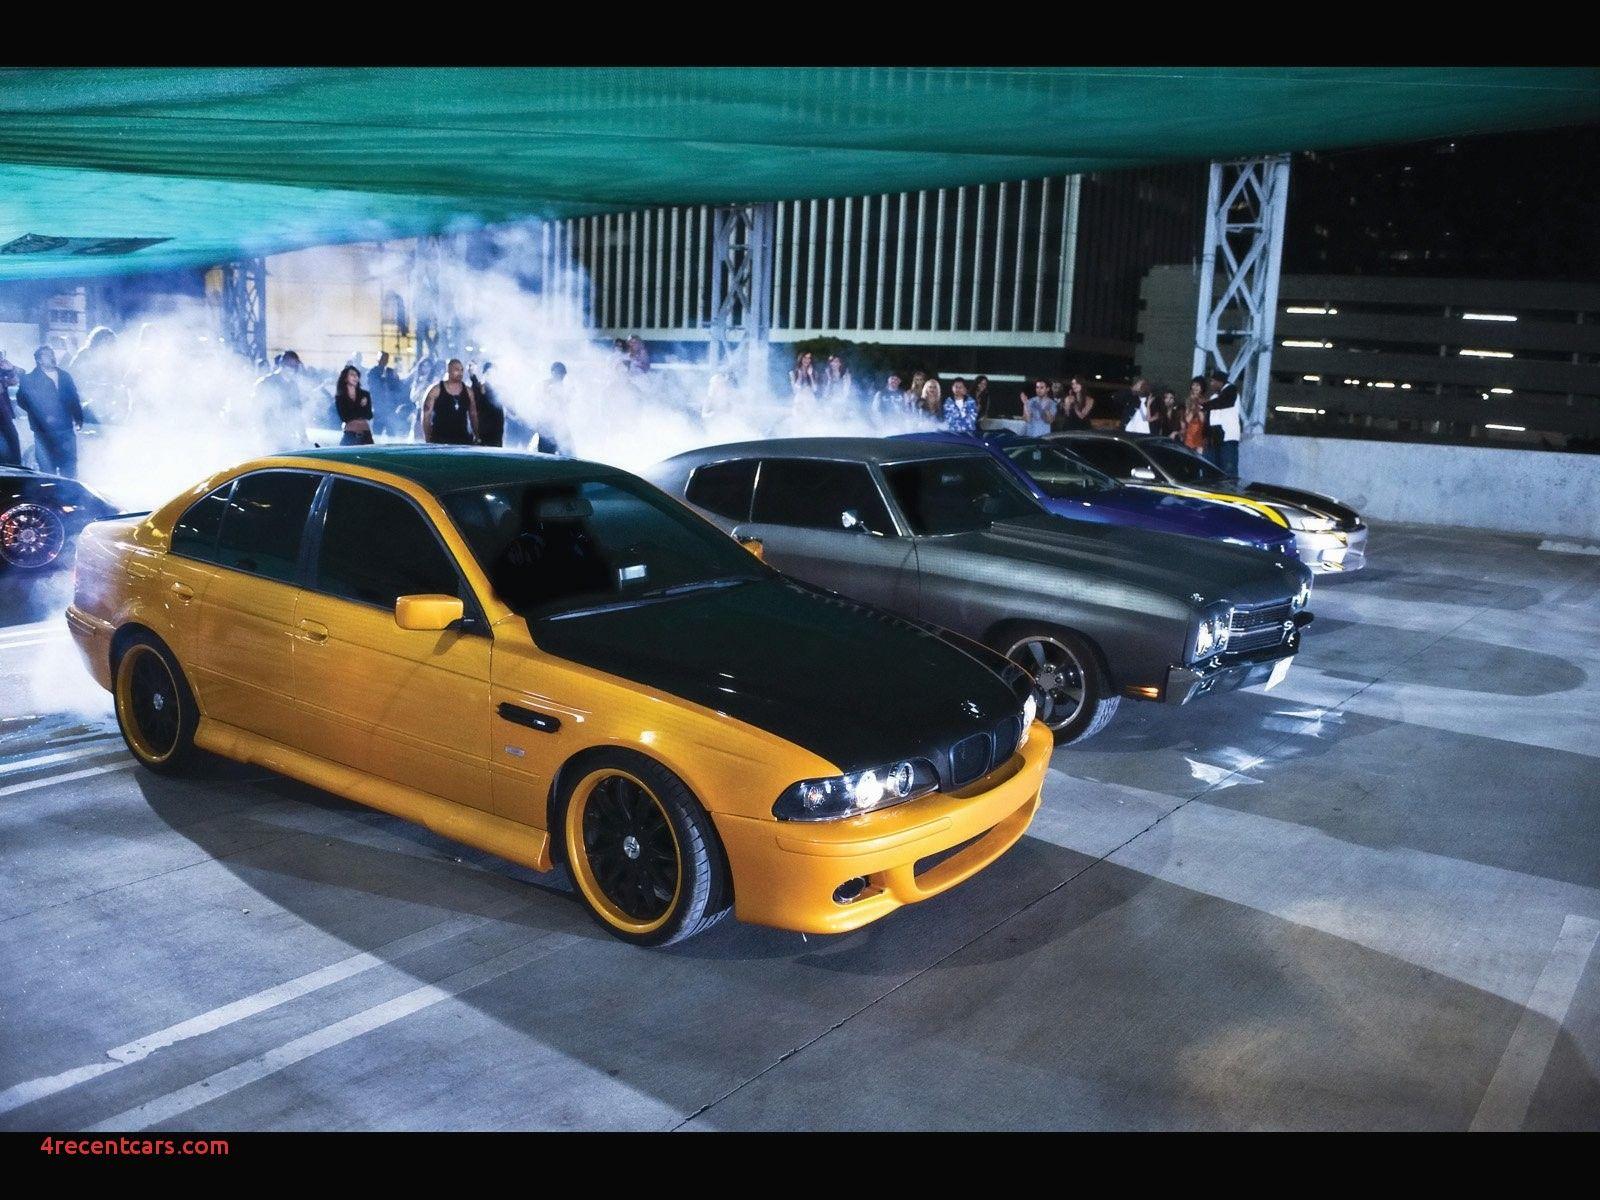 Fast and Furious tokyo Drift Cars Wallpaper Best Of the Fast and